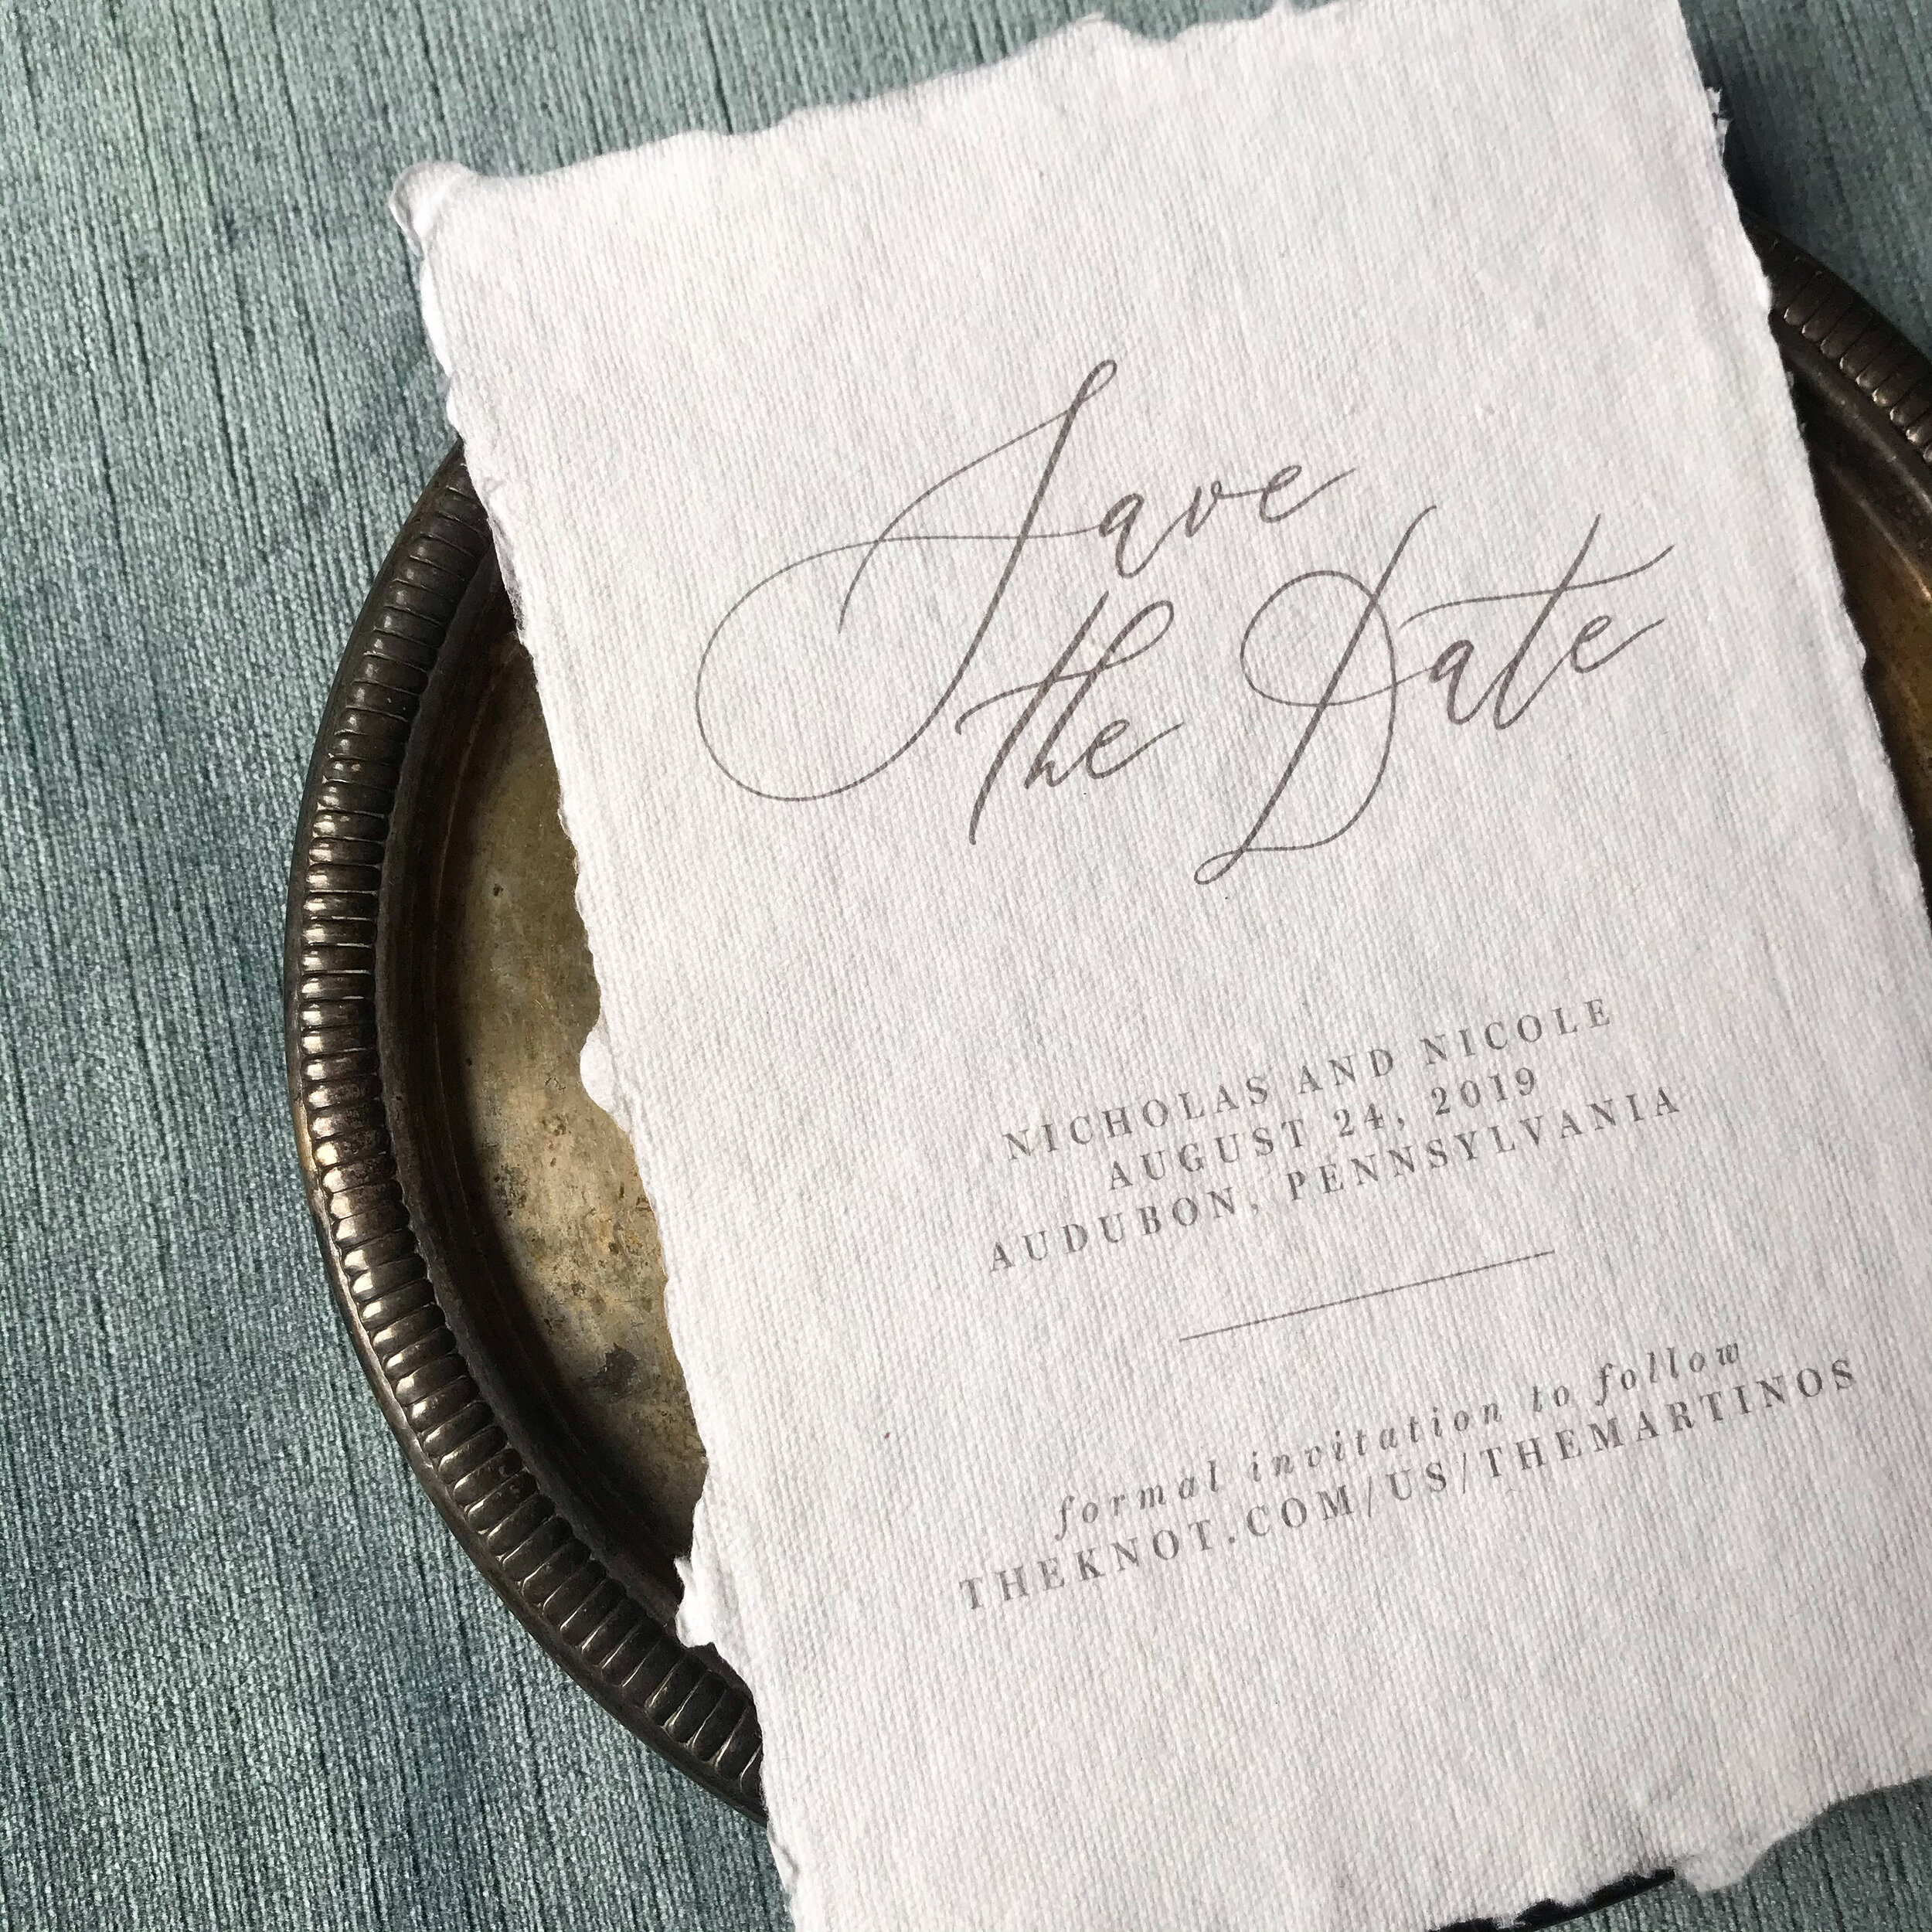 Save-the-Date-1.JPG